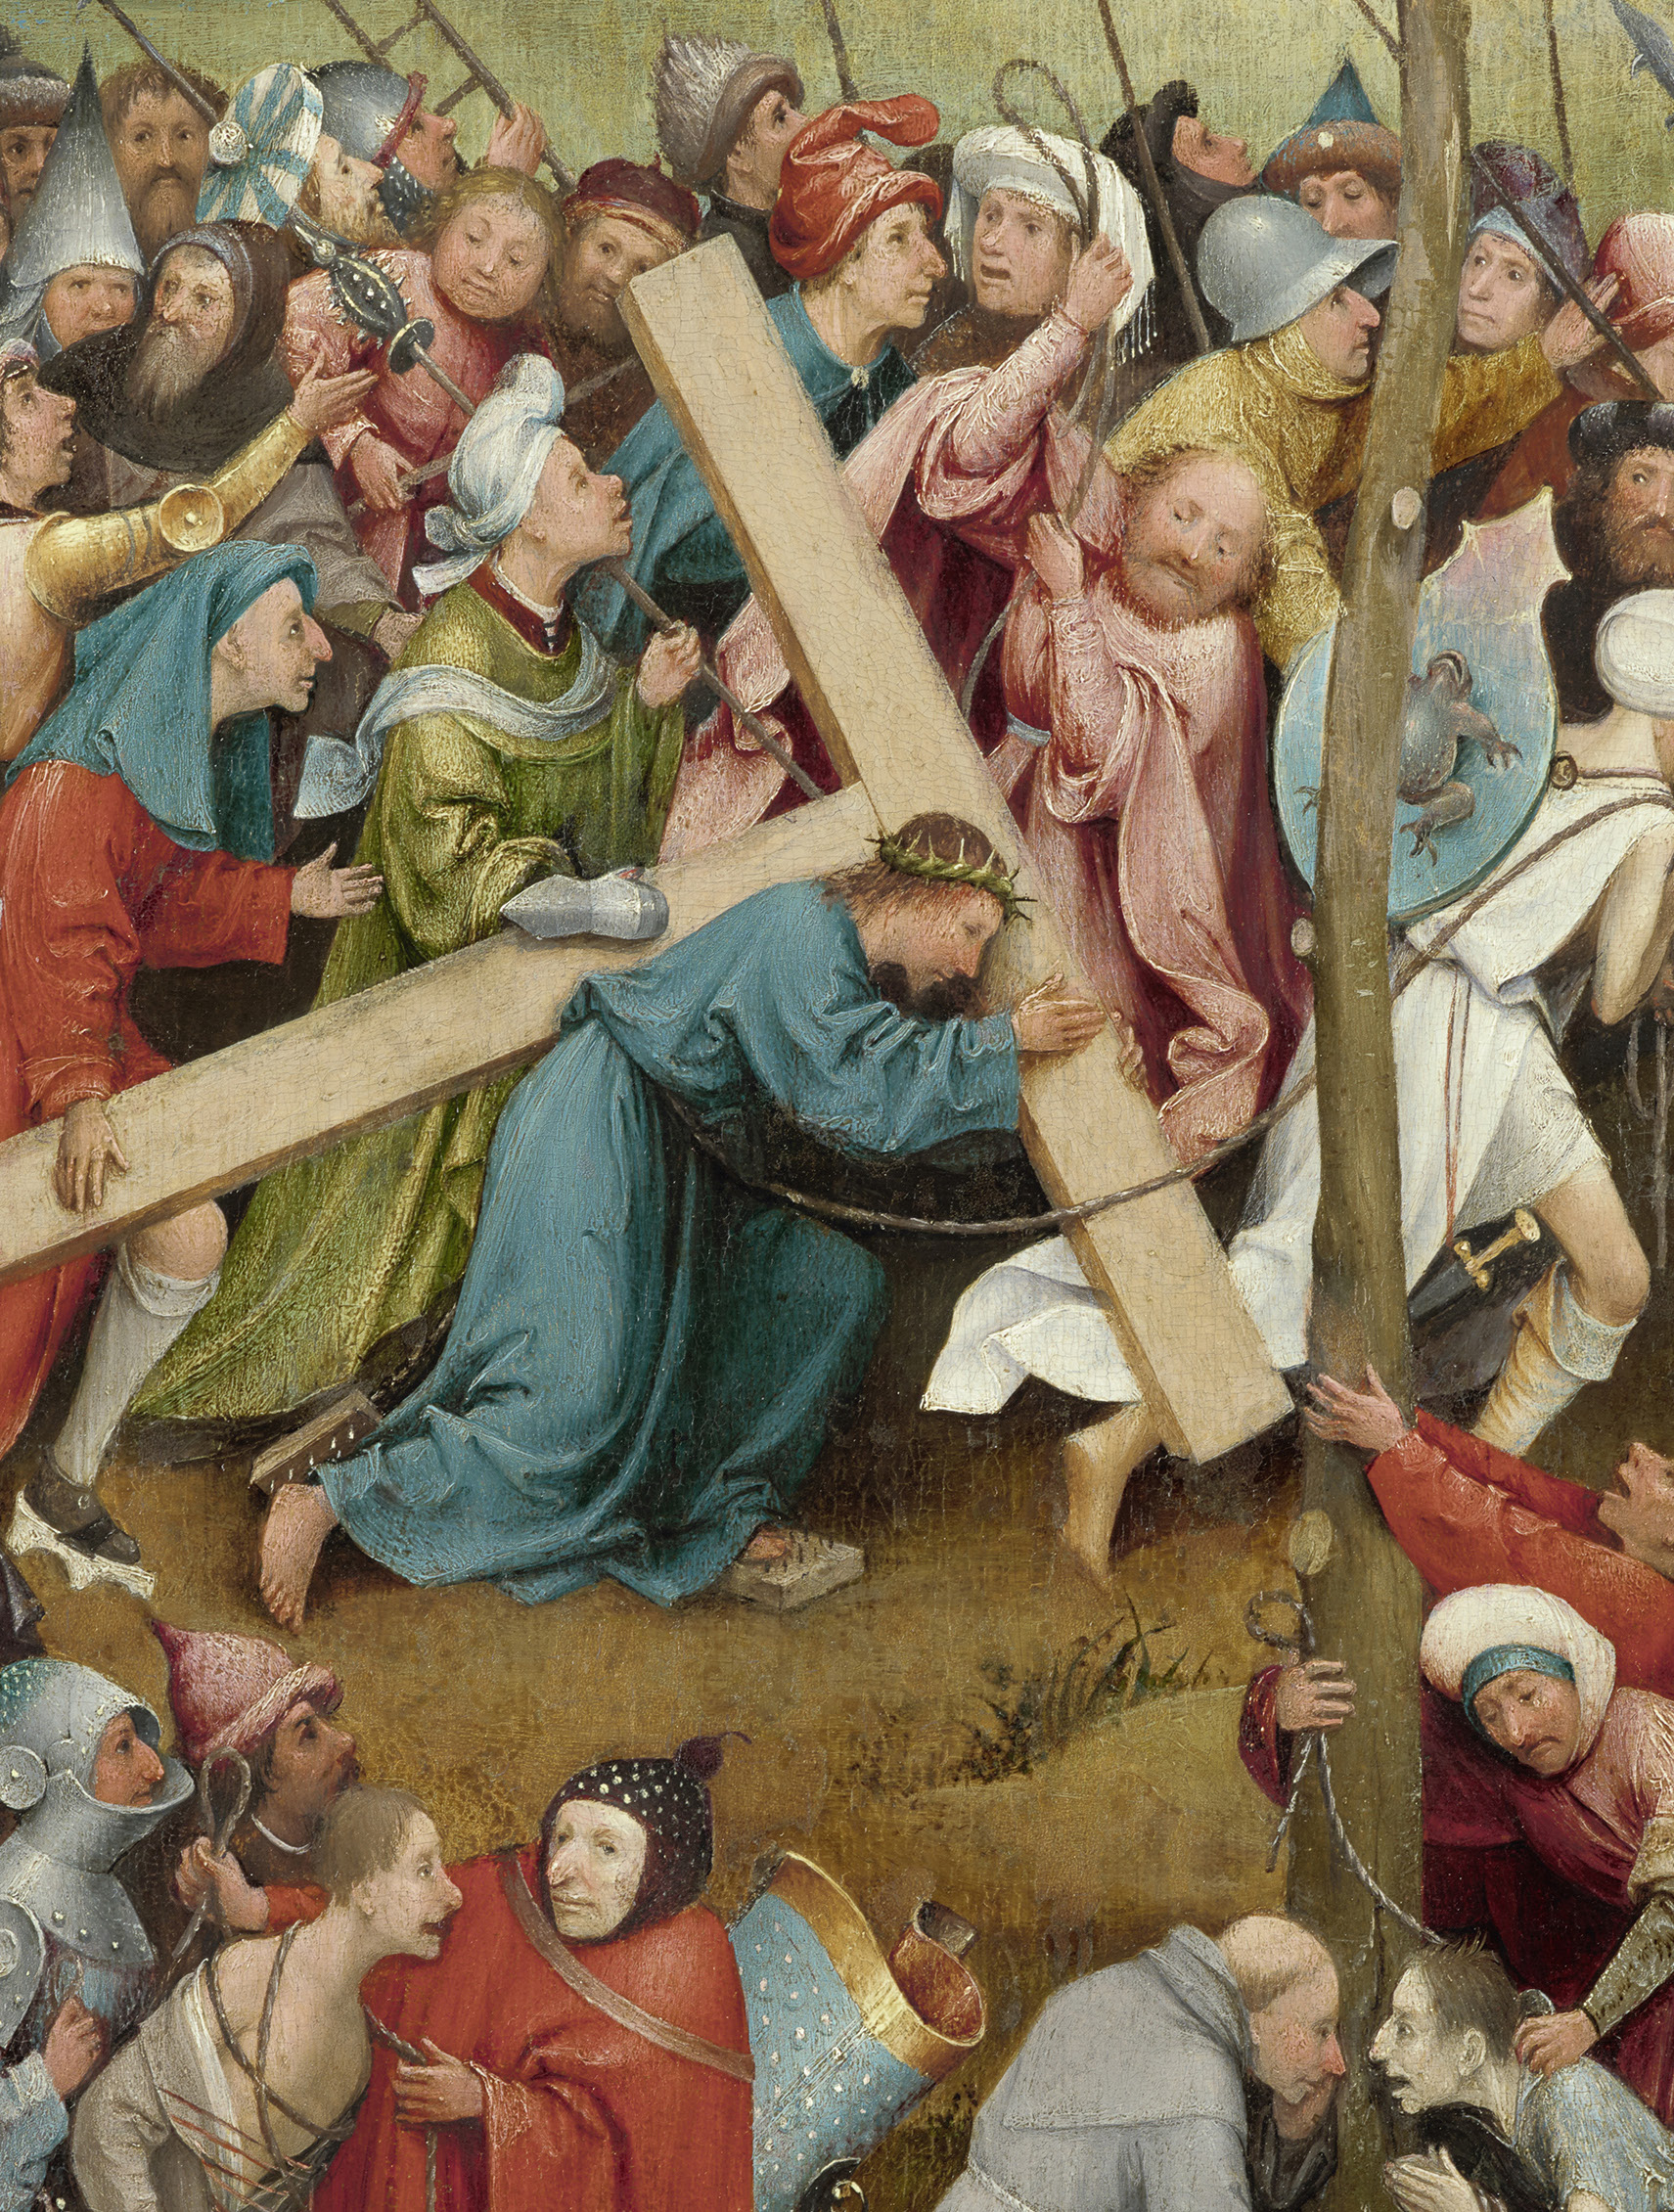 “Behold the Lamb of God, which taketh away the sin of the world” (John 1:29). Hieronymus Bosch, Christ Carrying the Cross, detail, ca. 1500, Kunsthistorisches Museum, Vienna. Directmedia Publishing GmbH (CC0 1.0).